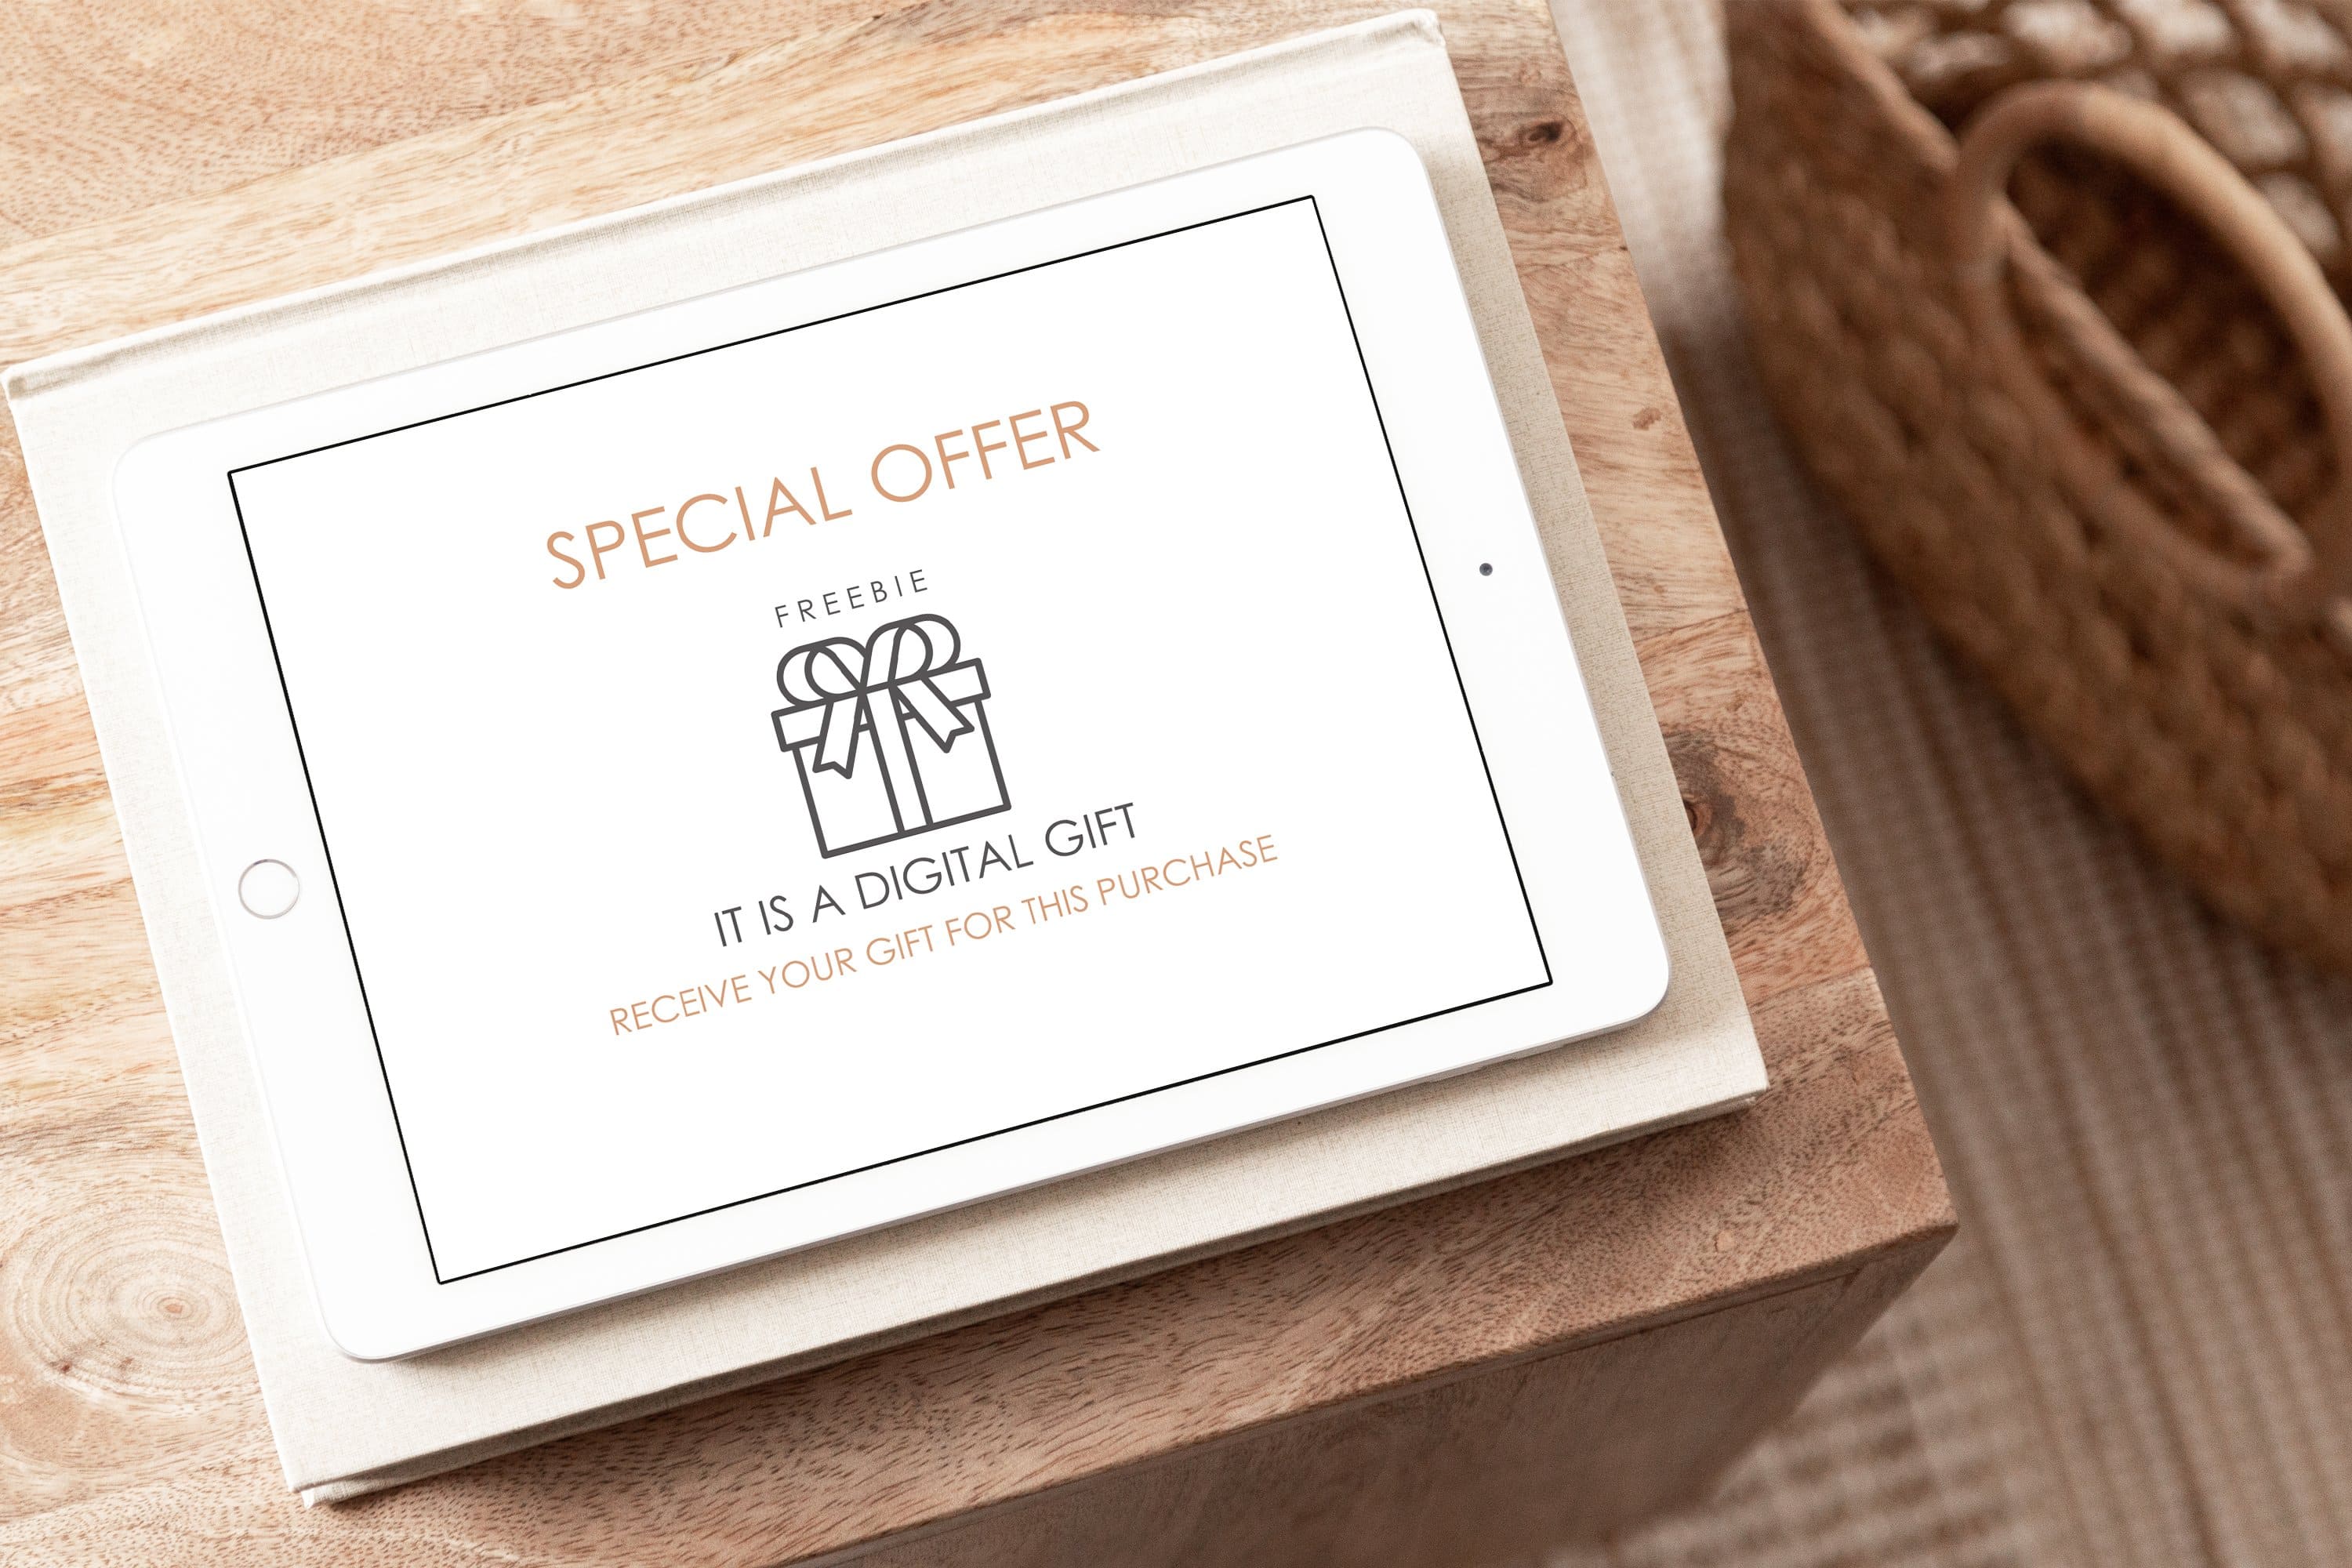 White card with inscription "Special offer and it is a digital gift".